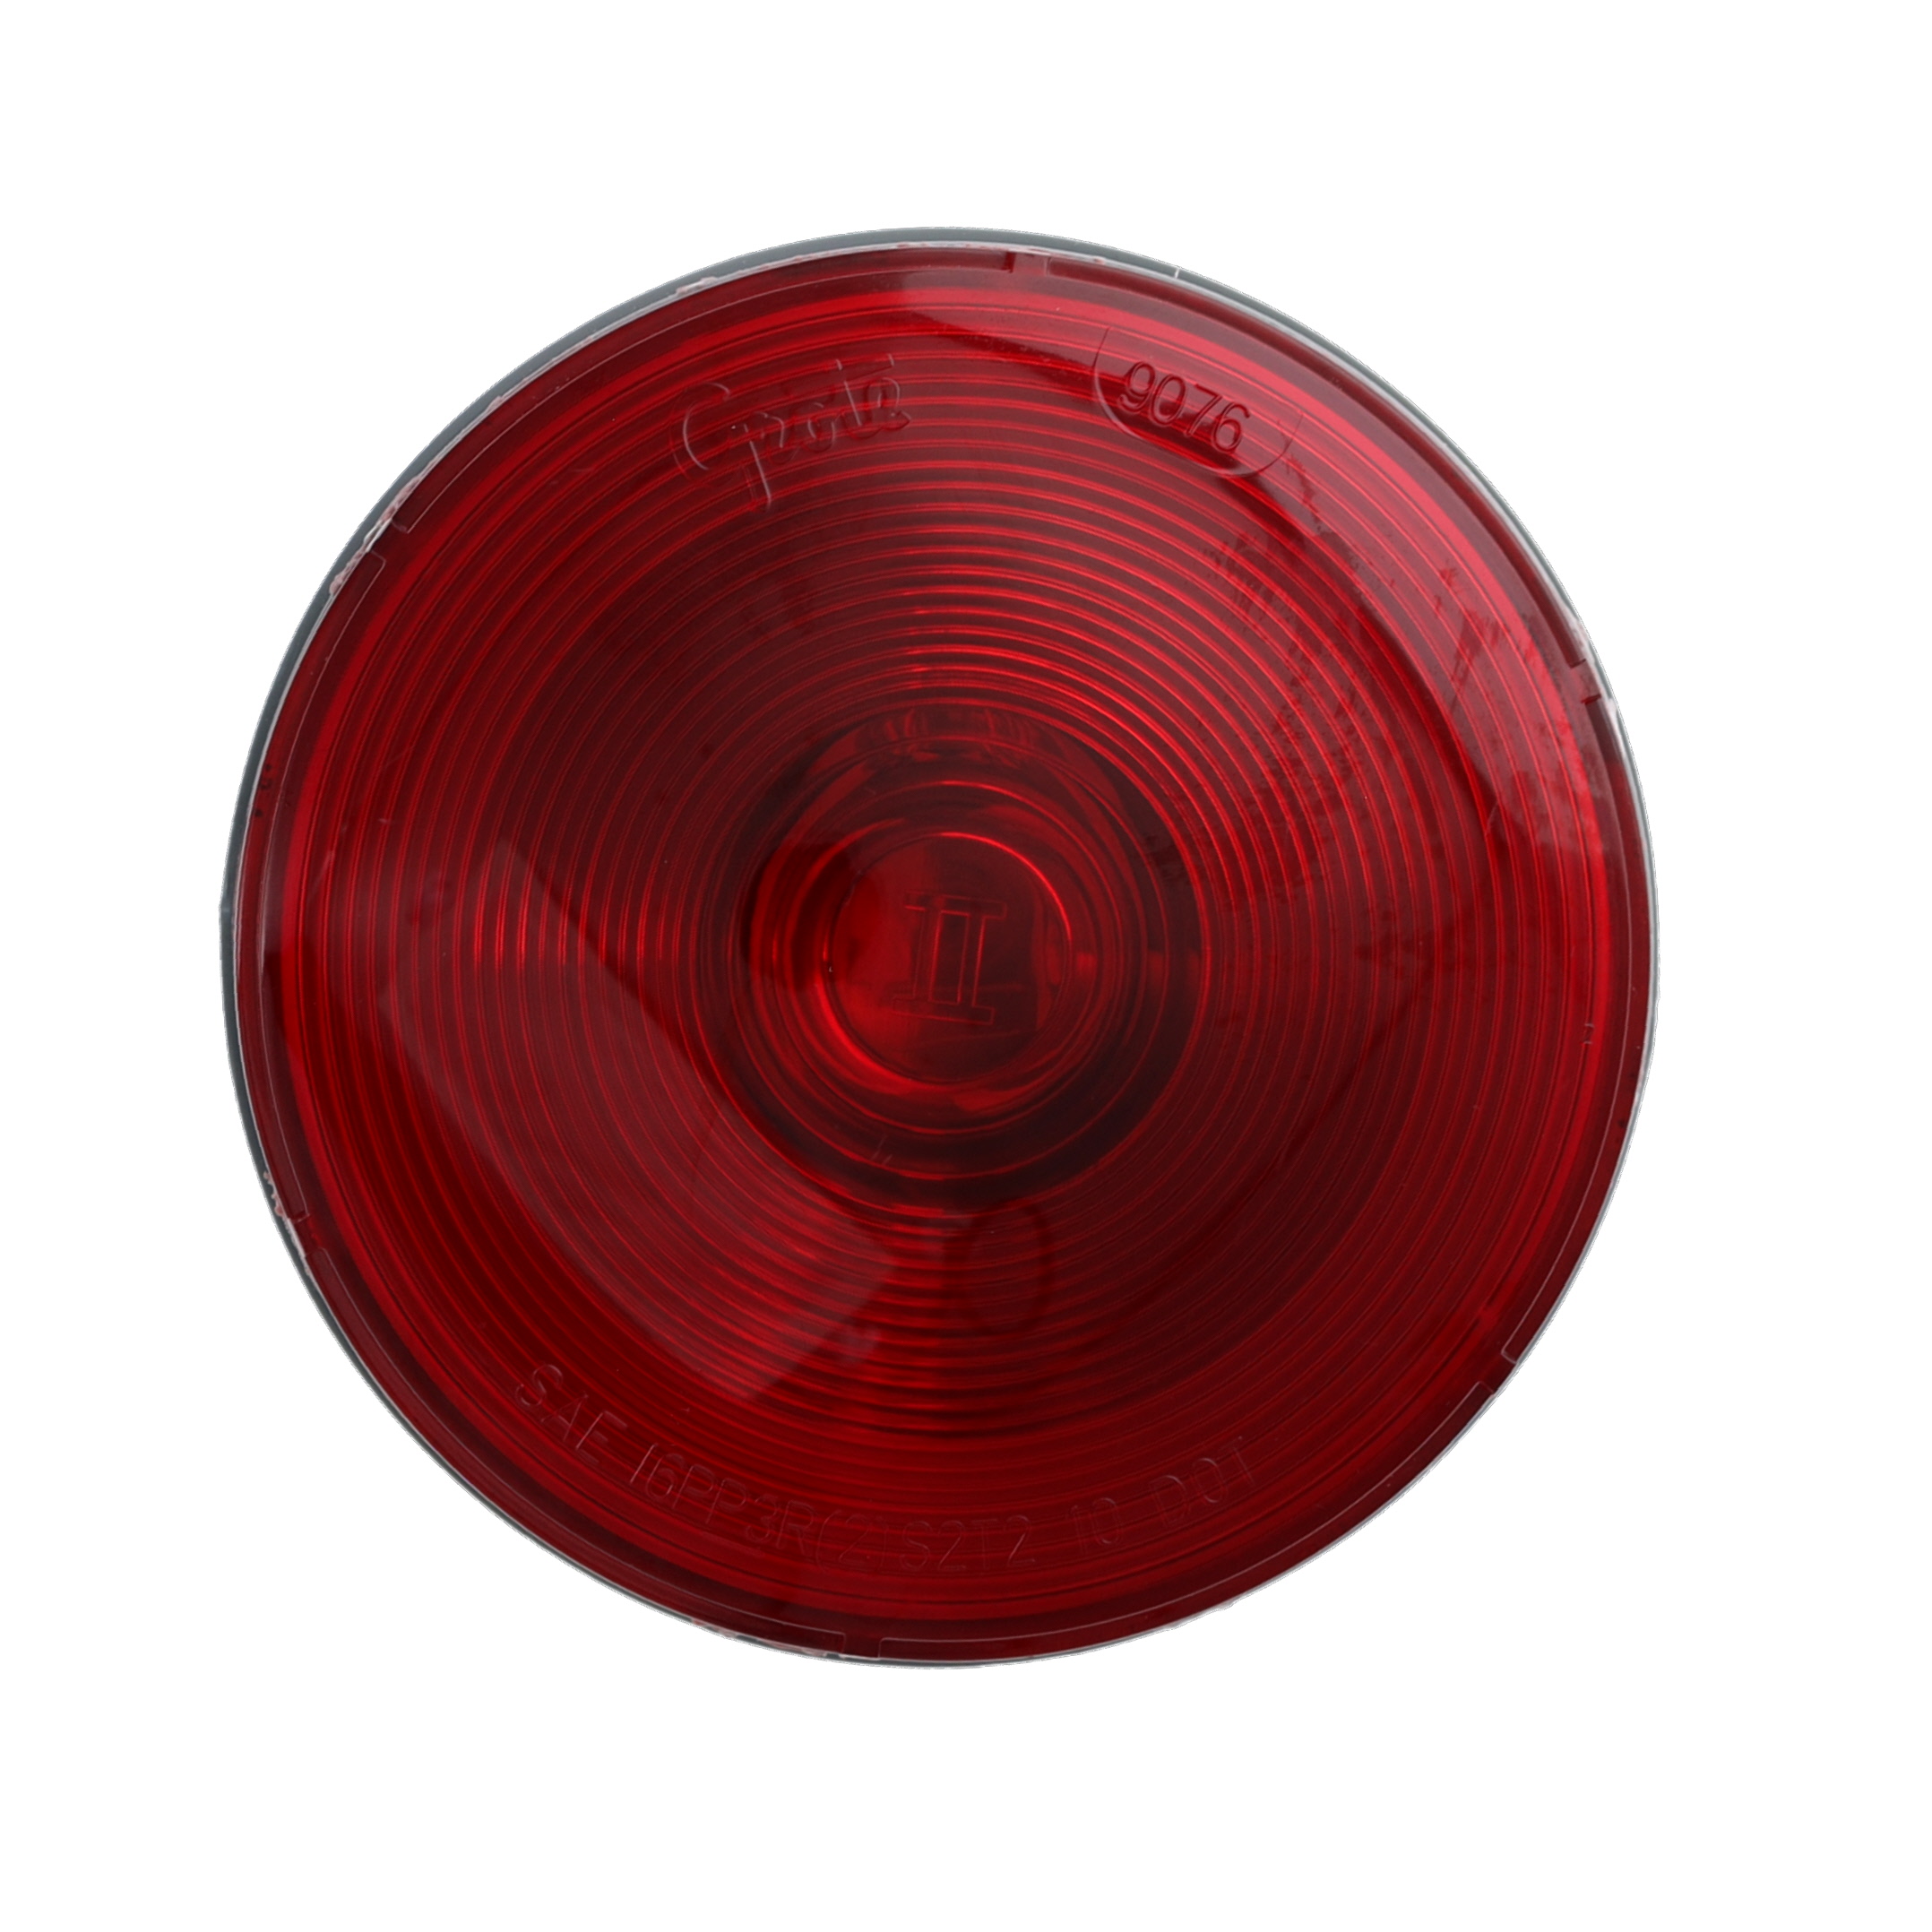 RoadPro RP-53102 4.25-Inch Sealed Grote-Style Stop Turn Tail Light Red Replacement Lens Vehicle Lighting